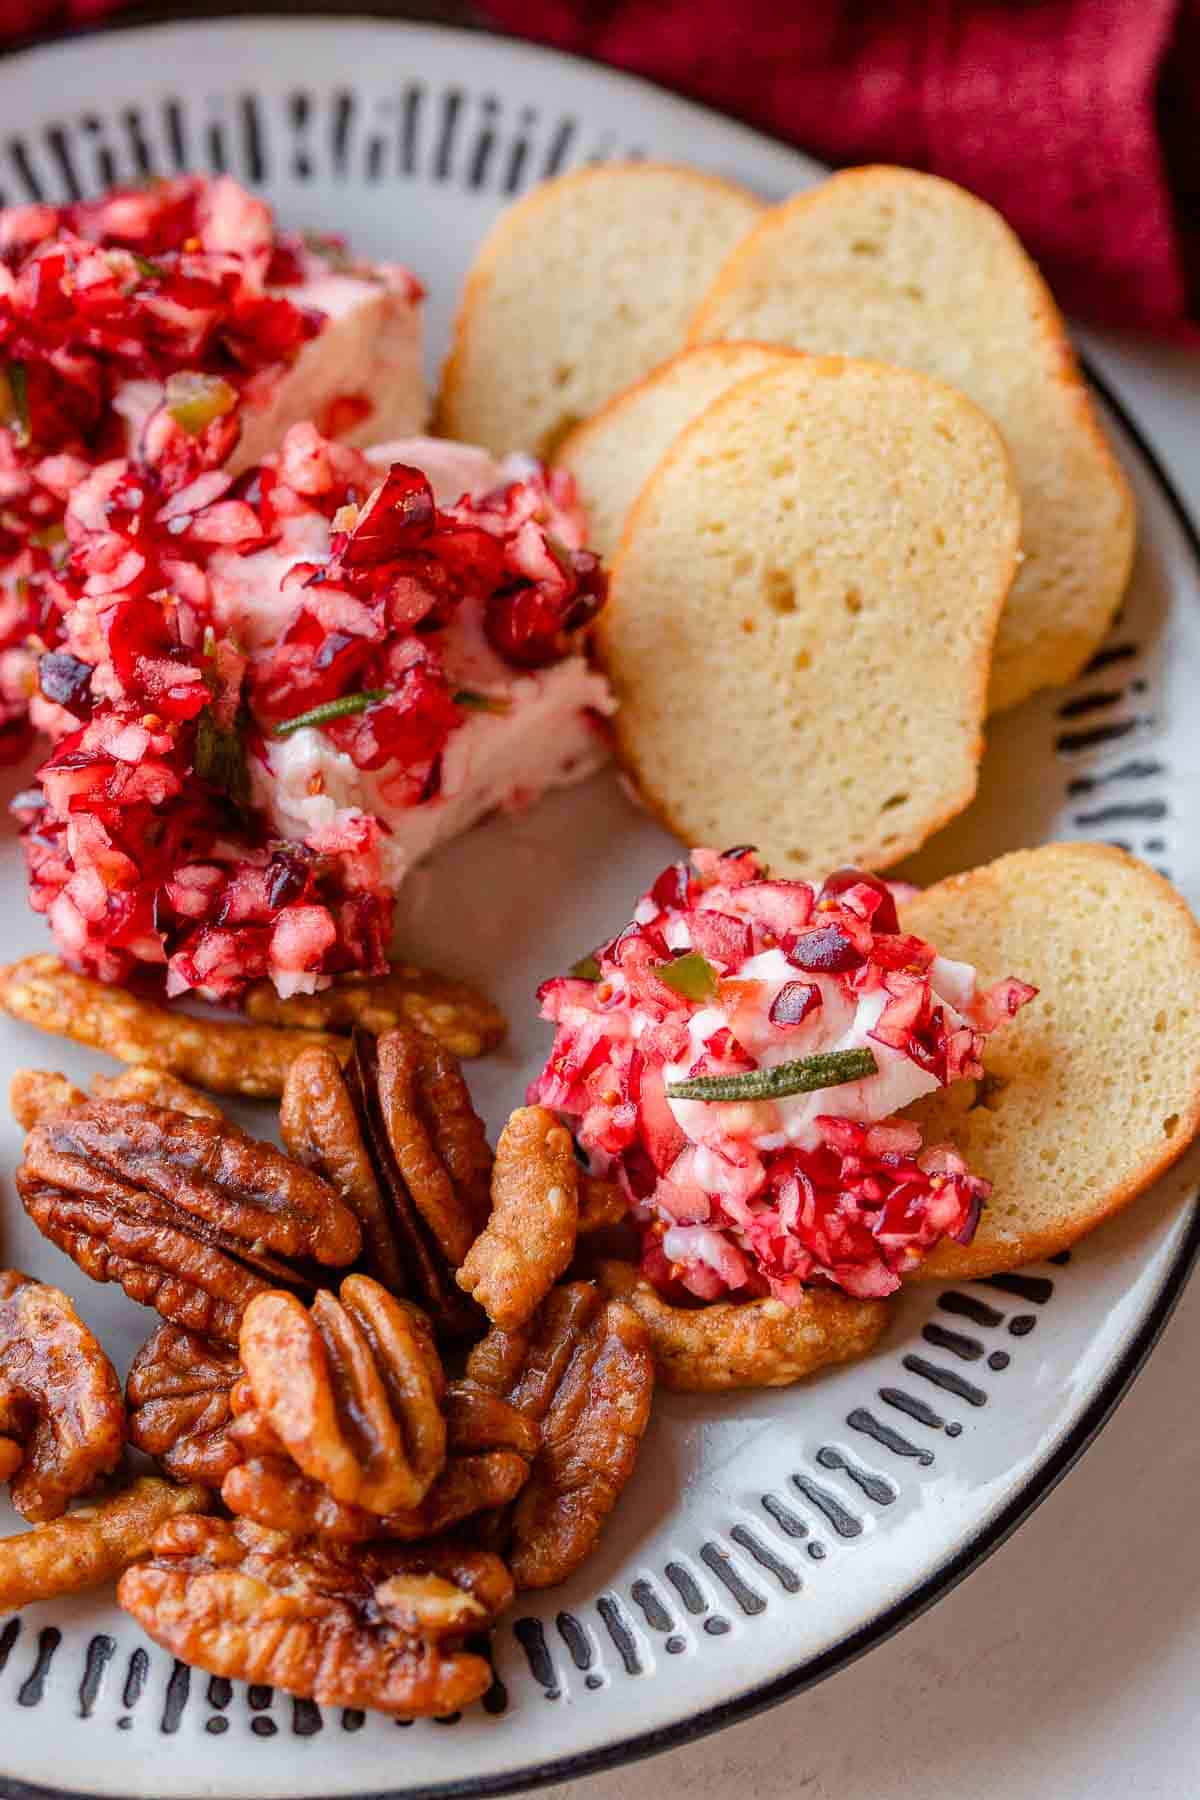 Cold cranberry jalapeno dip with crostini.